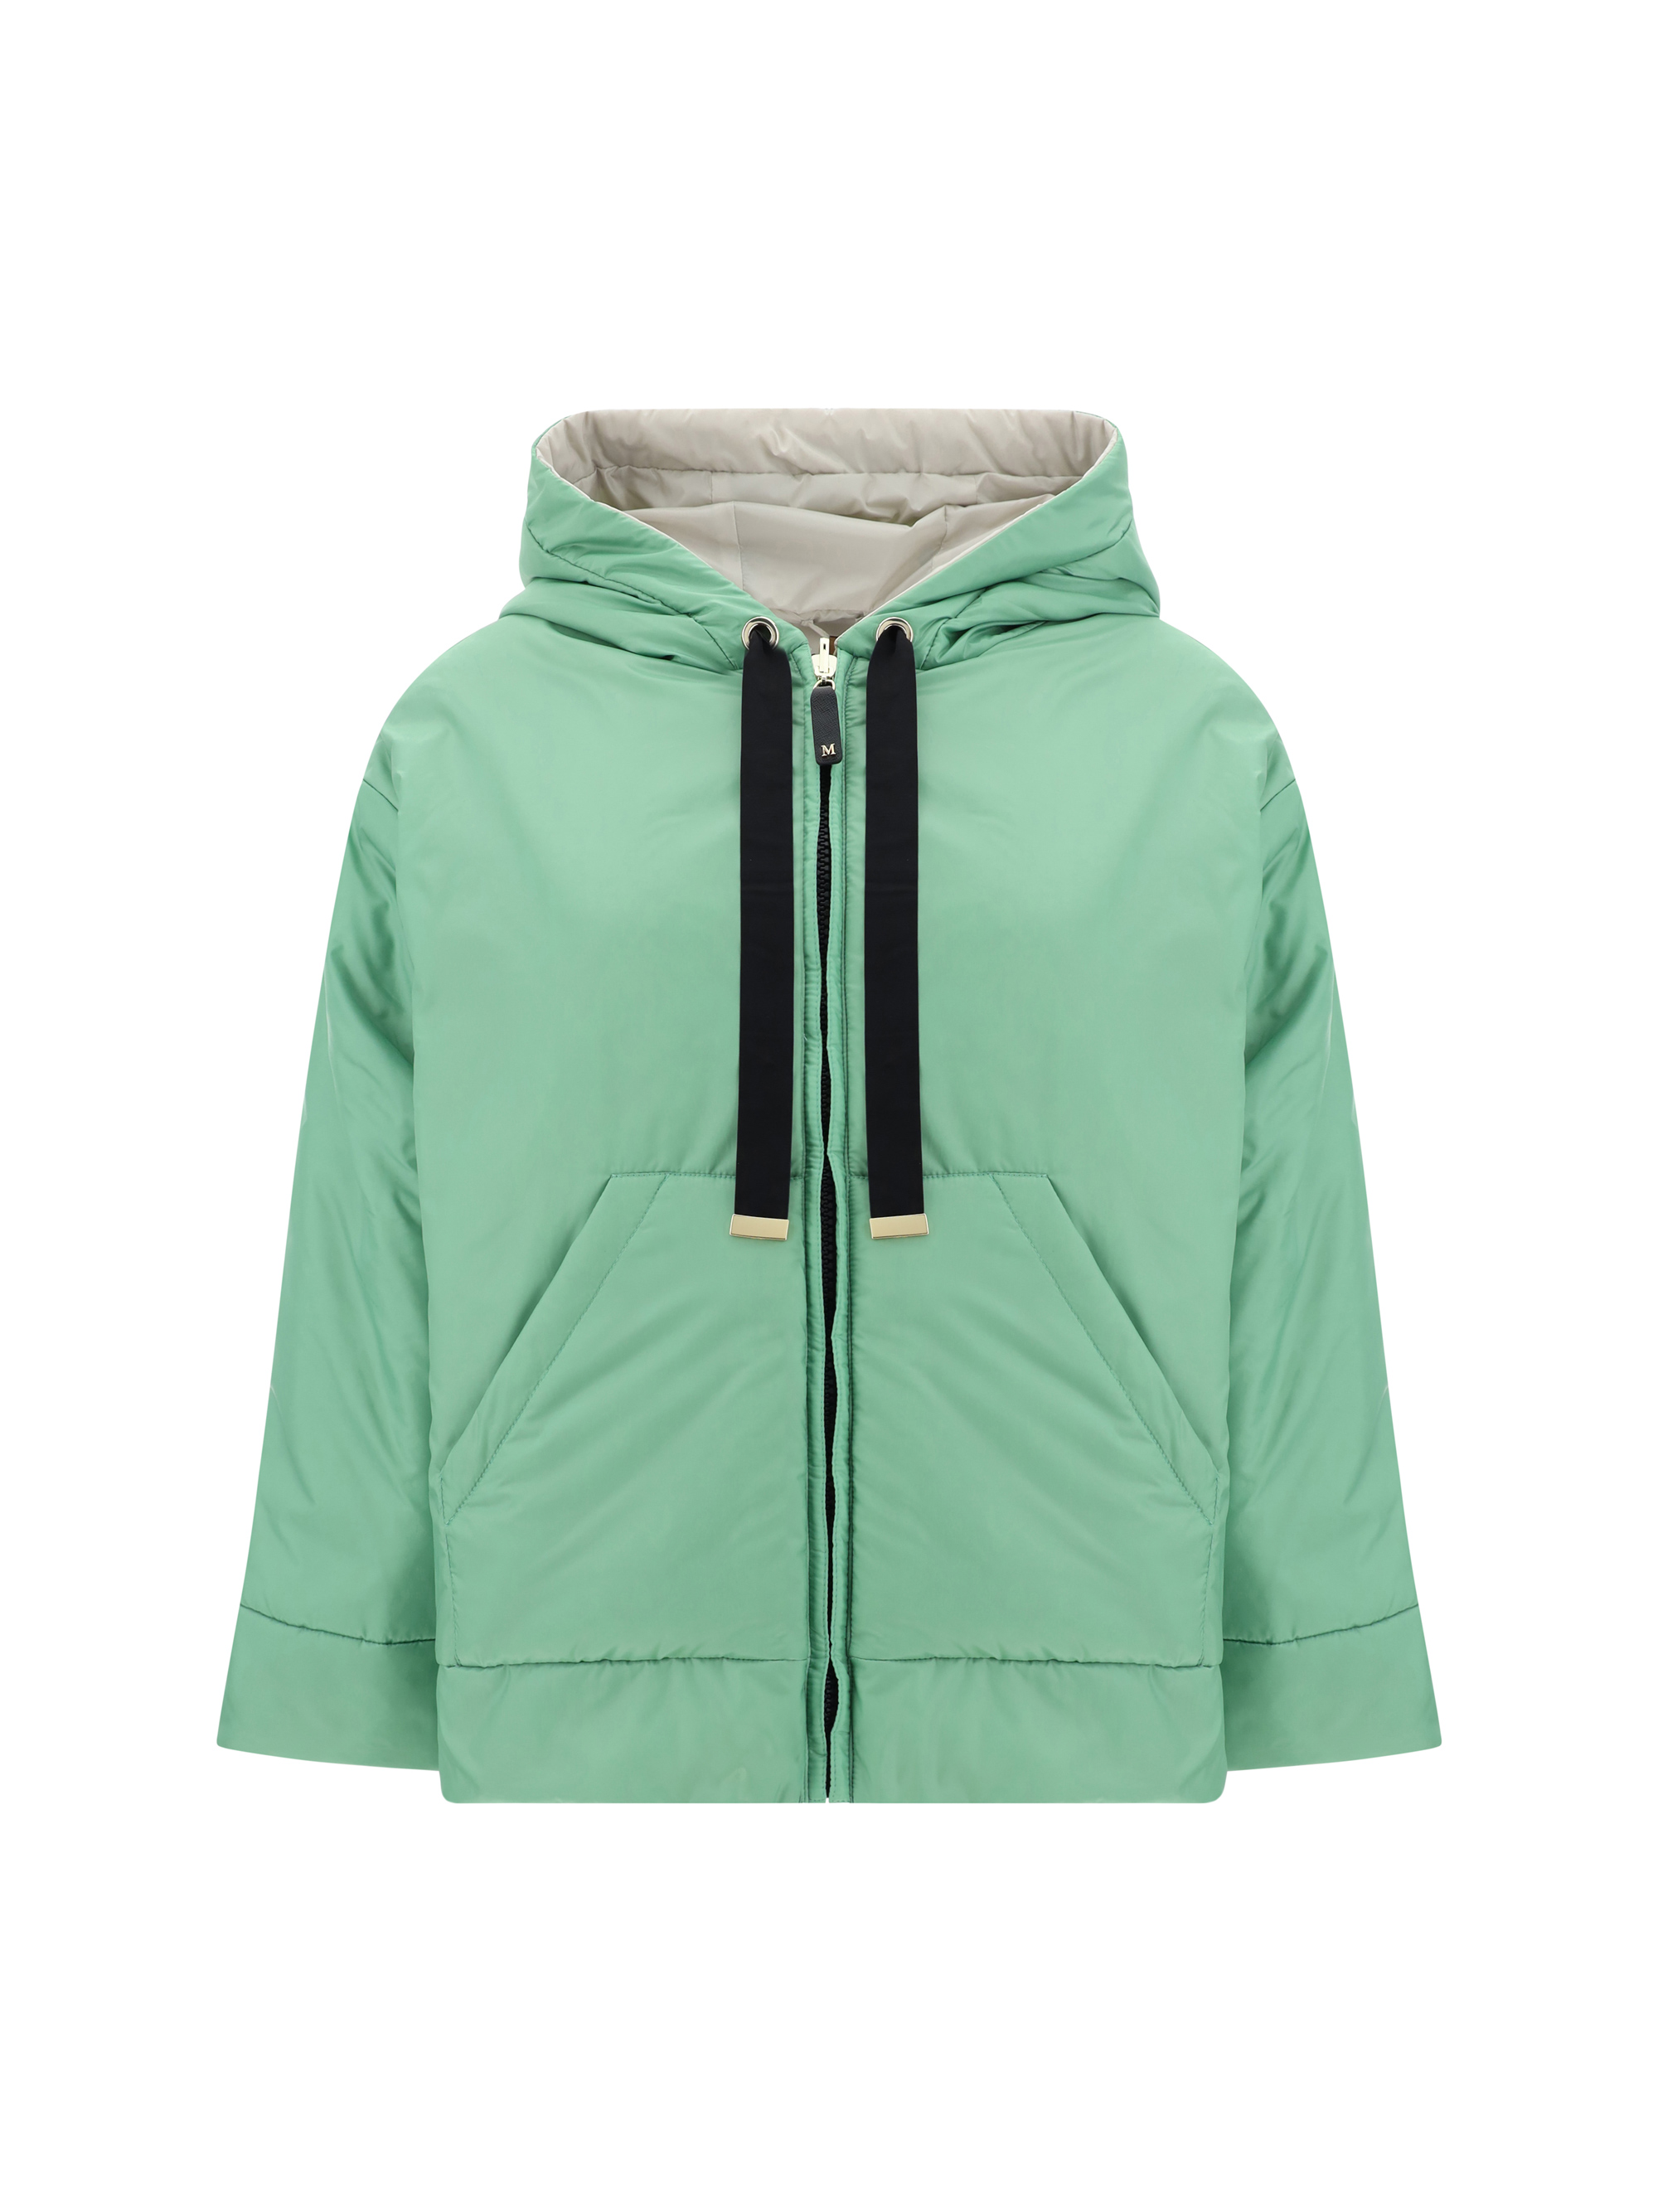 Max Mara The Cube Reversible Down Jacket In Verde Pastello